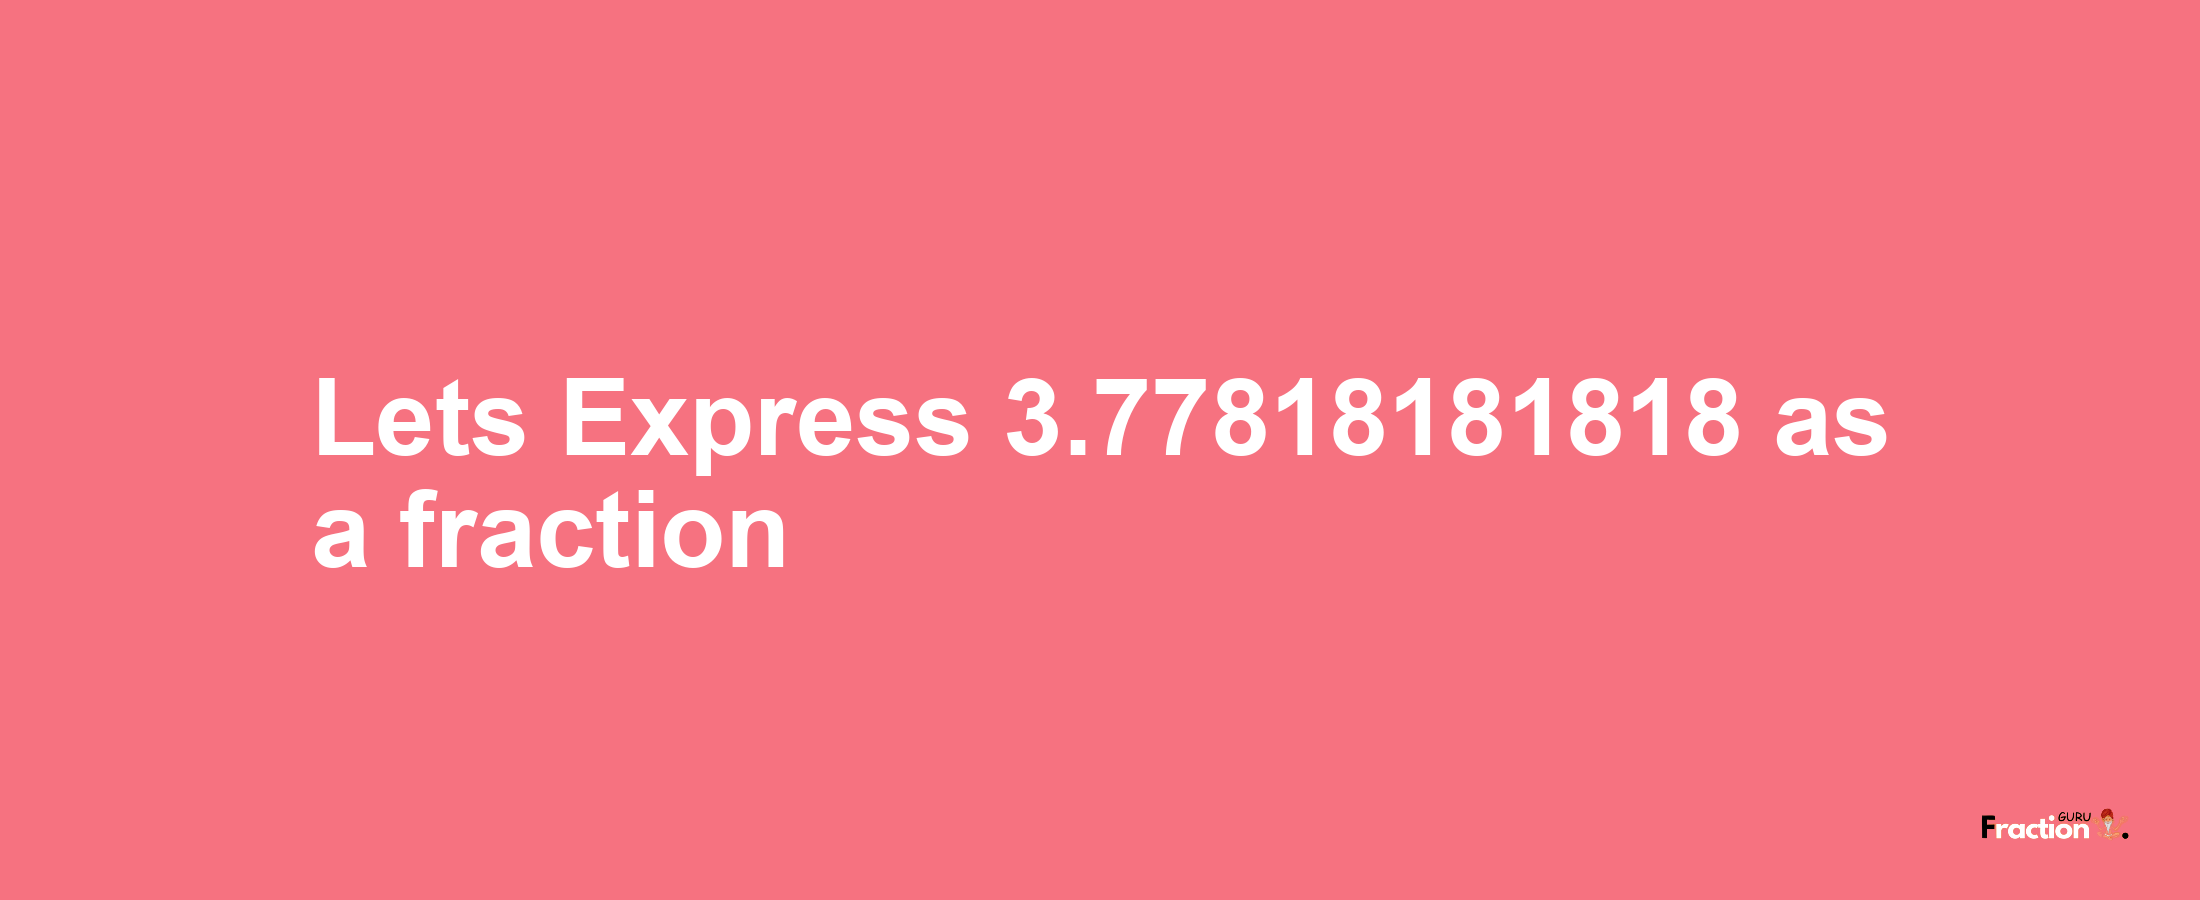 Lets Express 3.77818181818 as afraction